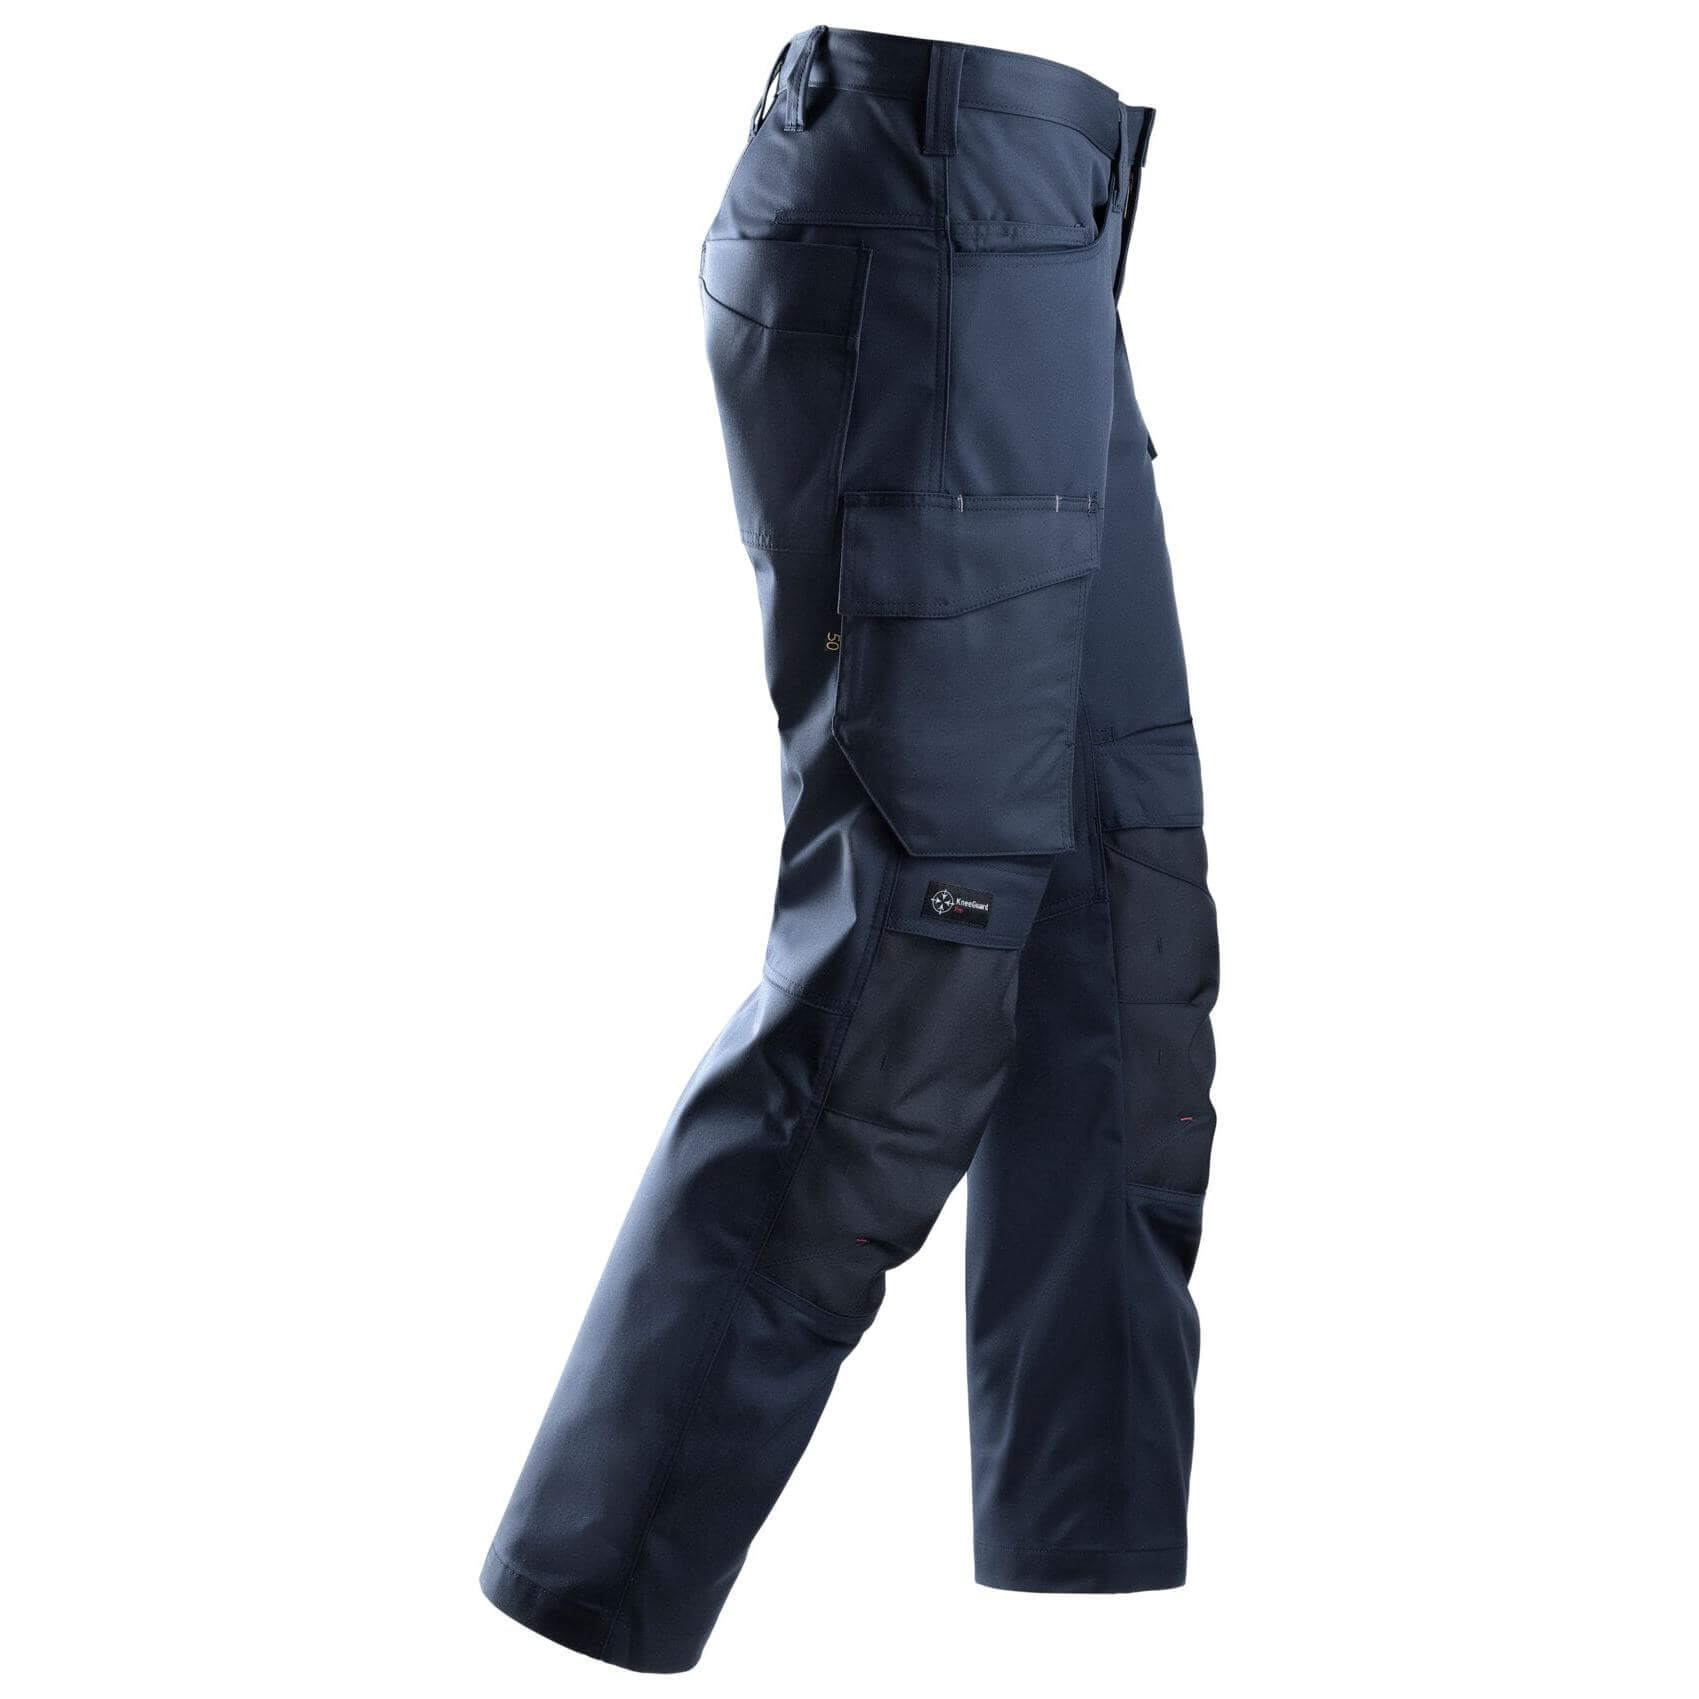 Snickers 6801 Service Trousers With Knee Pad Pockets Navy